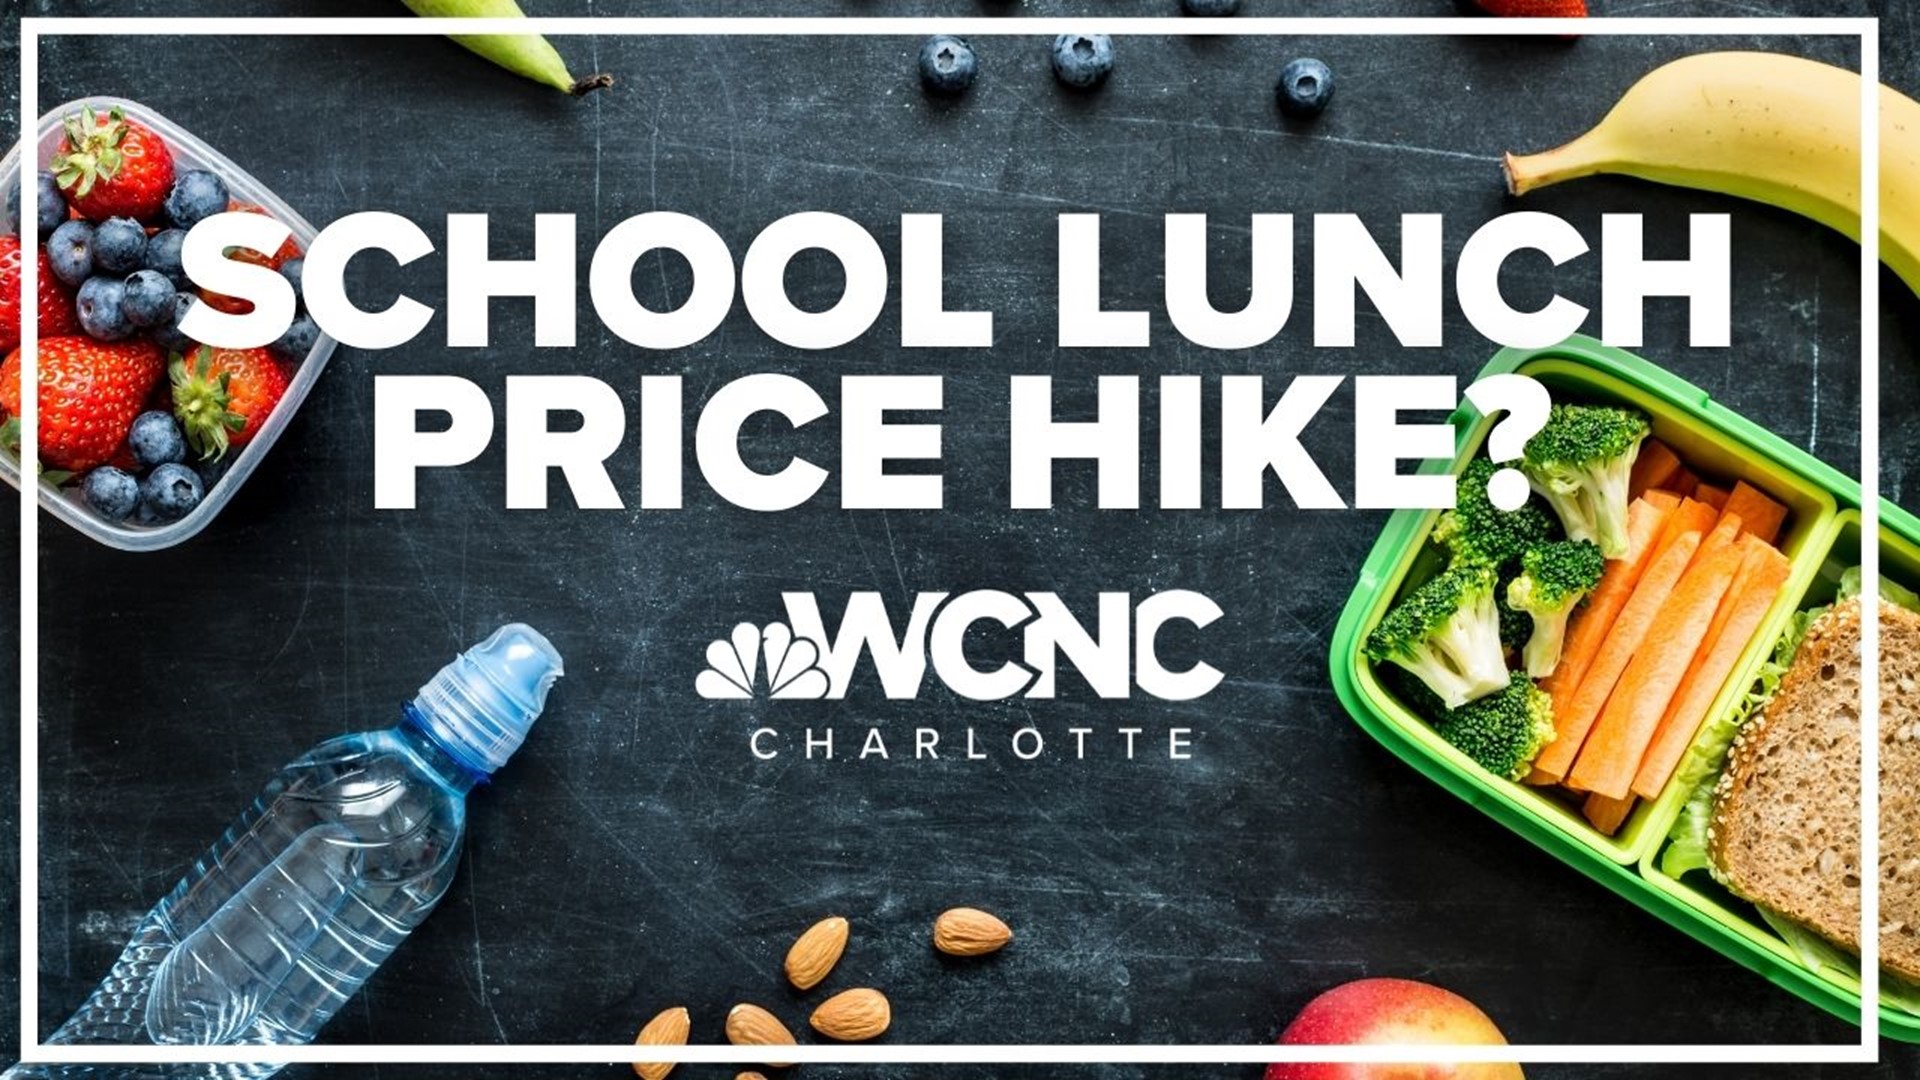 School meal prices will be up for discussion in Cabarrus County Monday, as district leaders consider raising the prices for next school year.